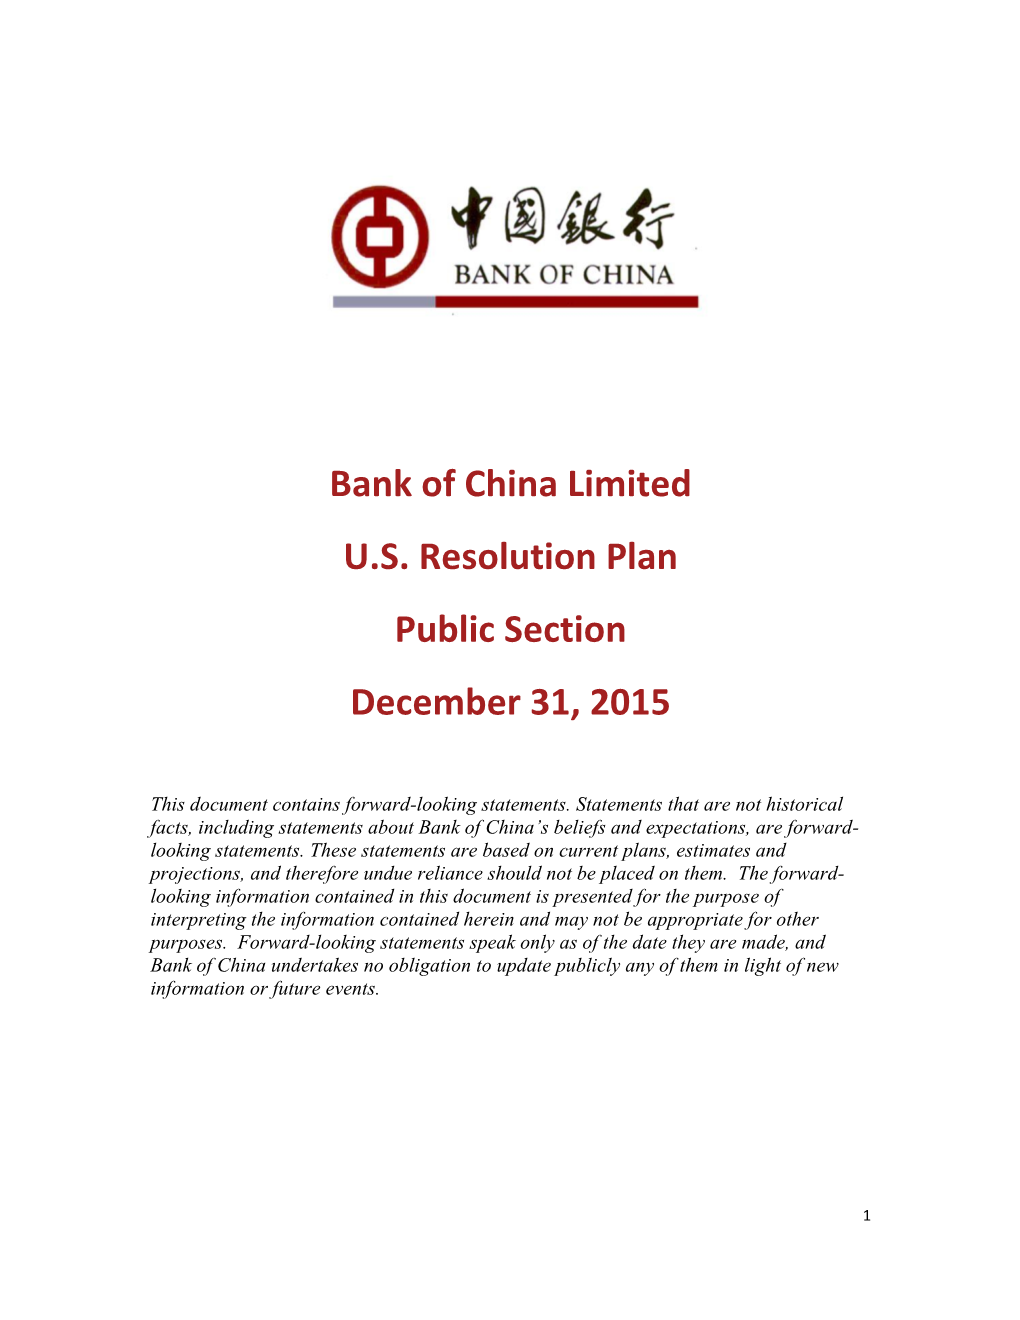 Bank of China Limited US Resolution Plan Public Section December 31, 2015